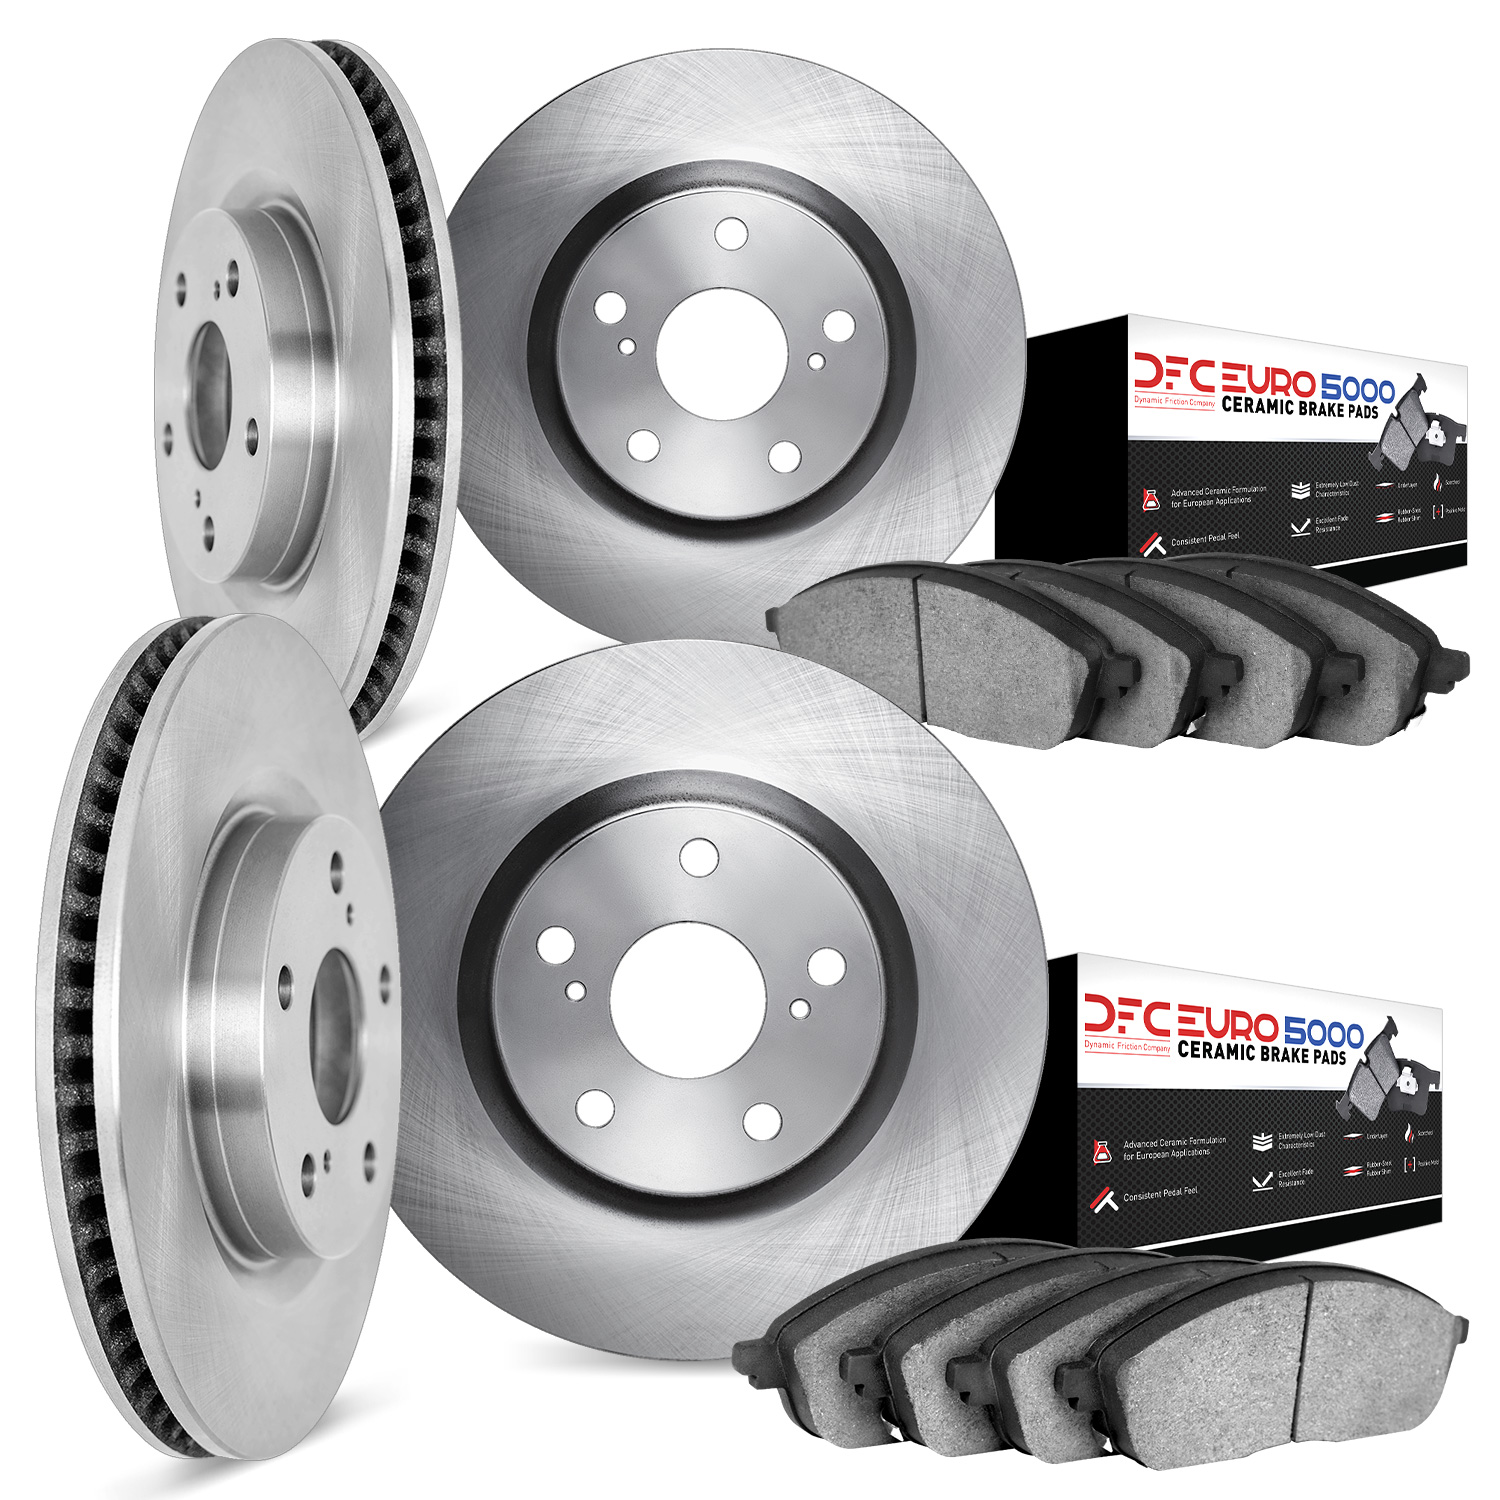 6604-12828 Brake Rotors w/5000 Euro Ceramic Brake Pads, 2017-2019 Volvo, Position: Front and Rear